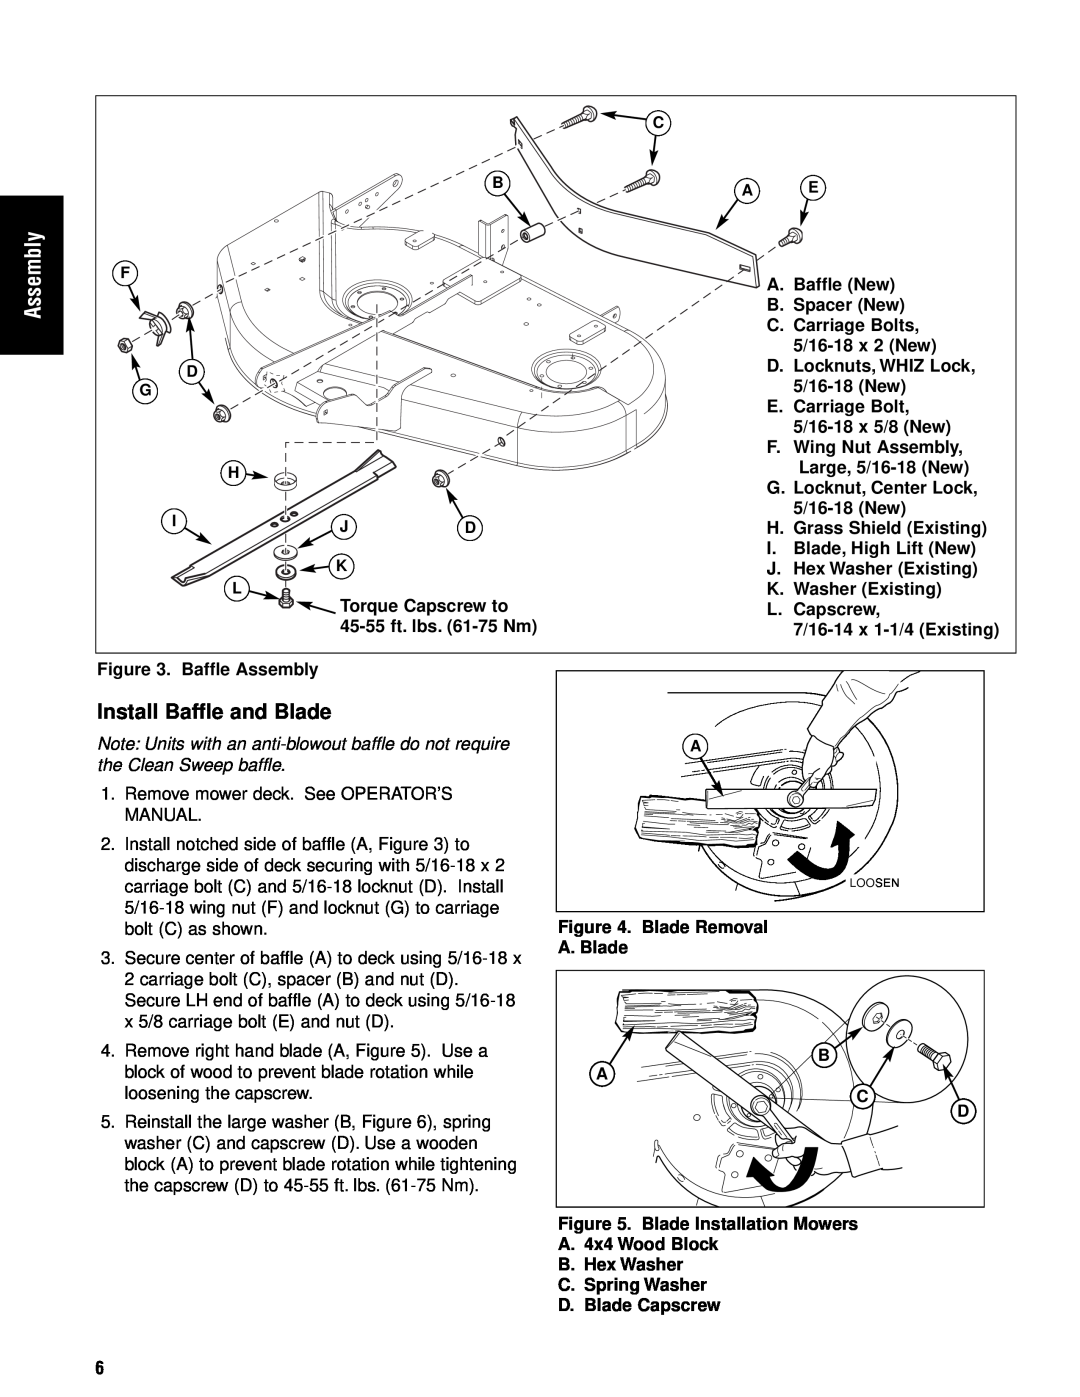 Briggs & Stratton 1695353 manual Install Baffle and Blade, Assembly 